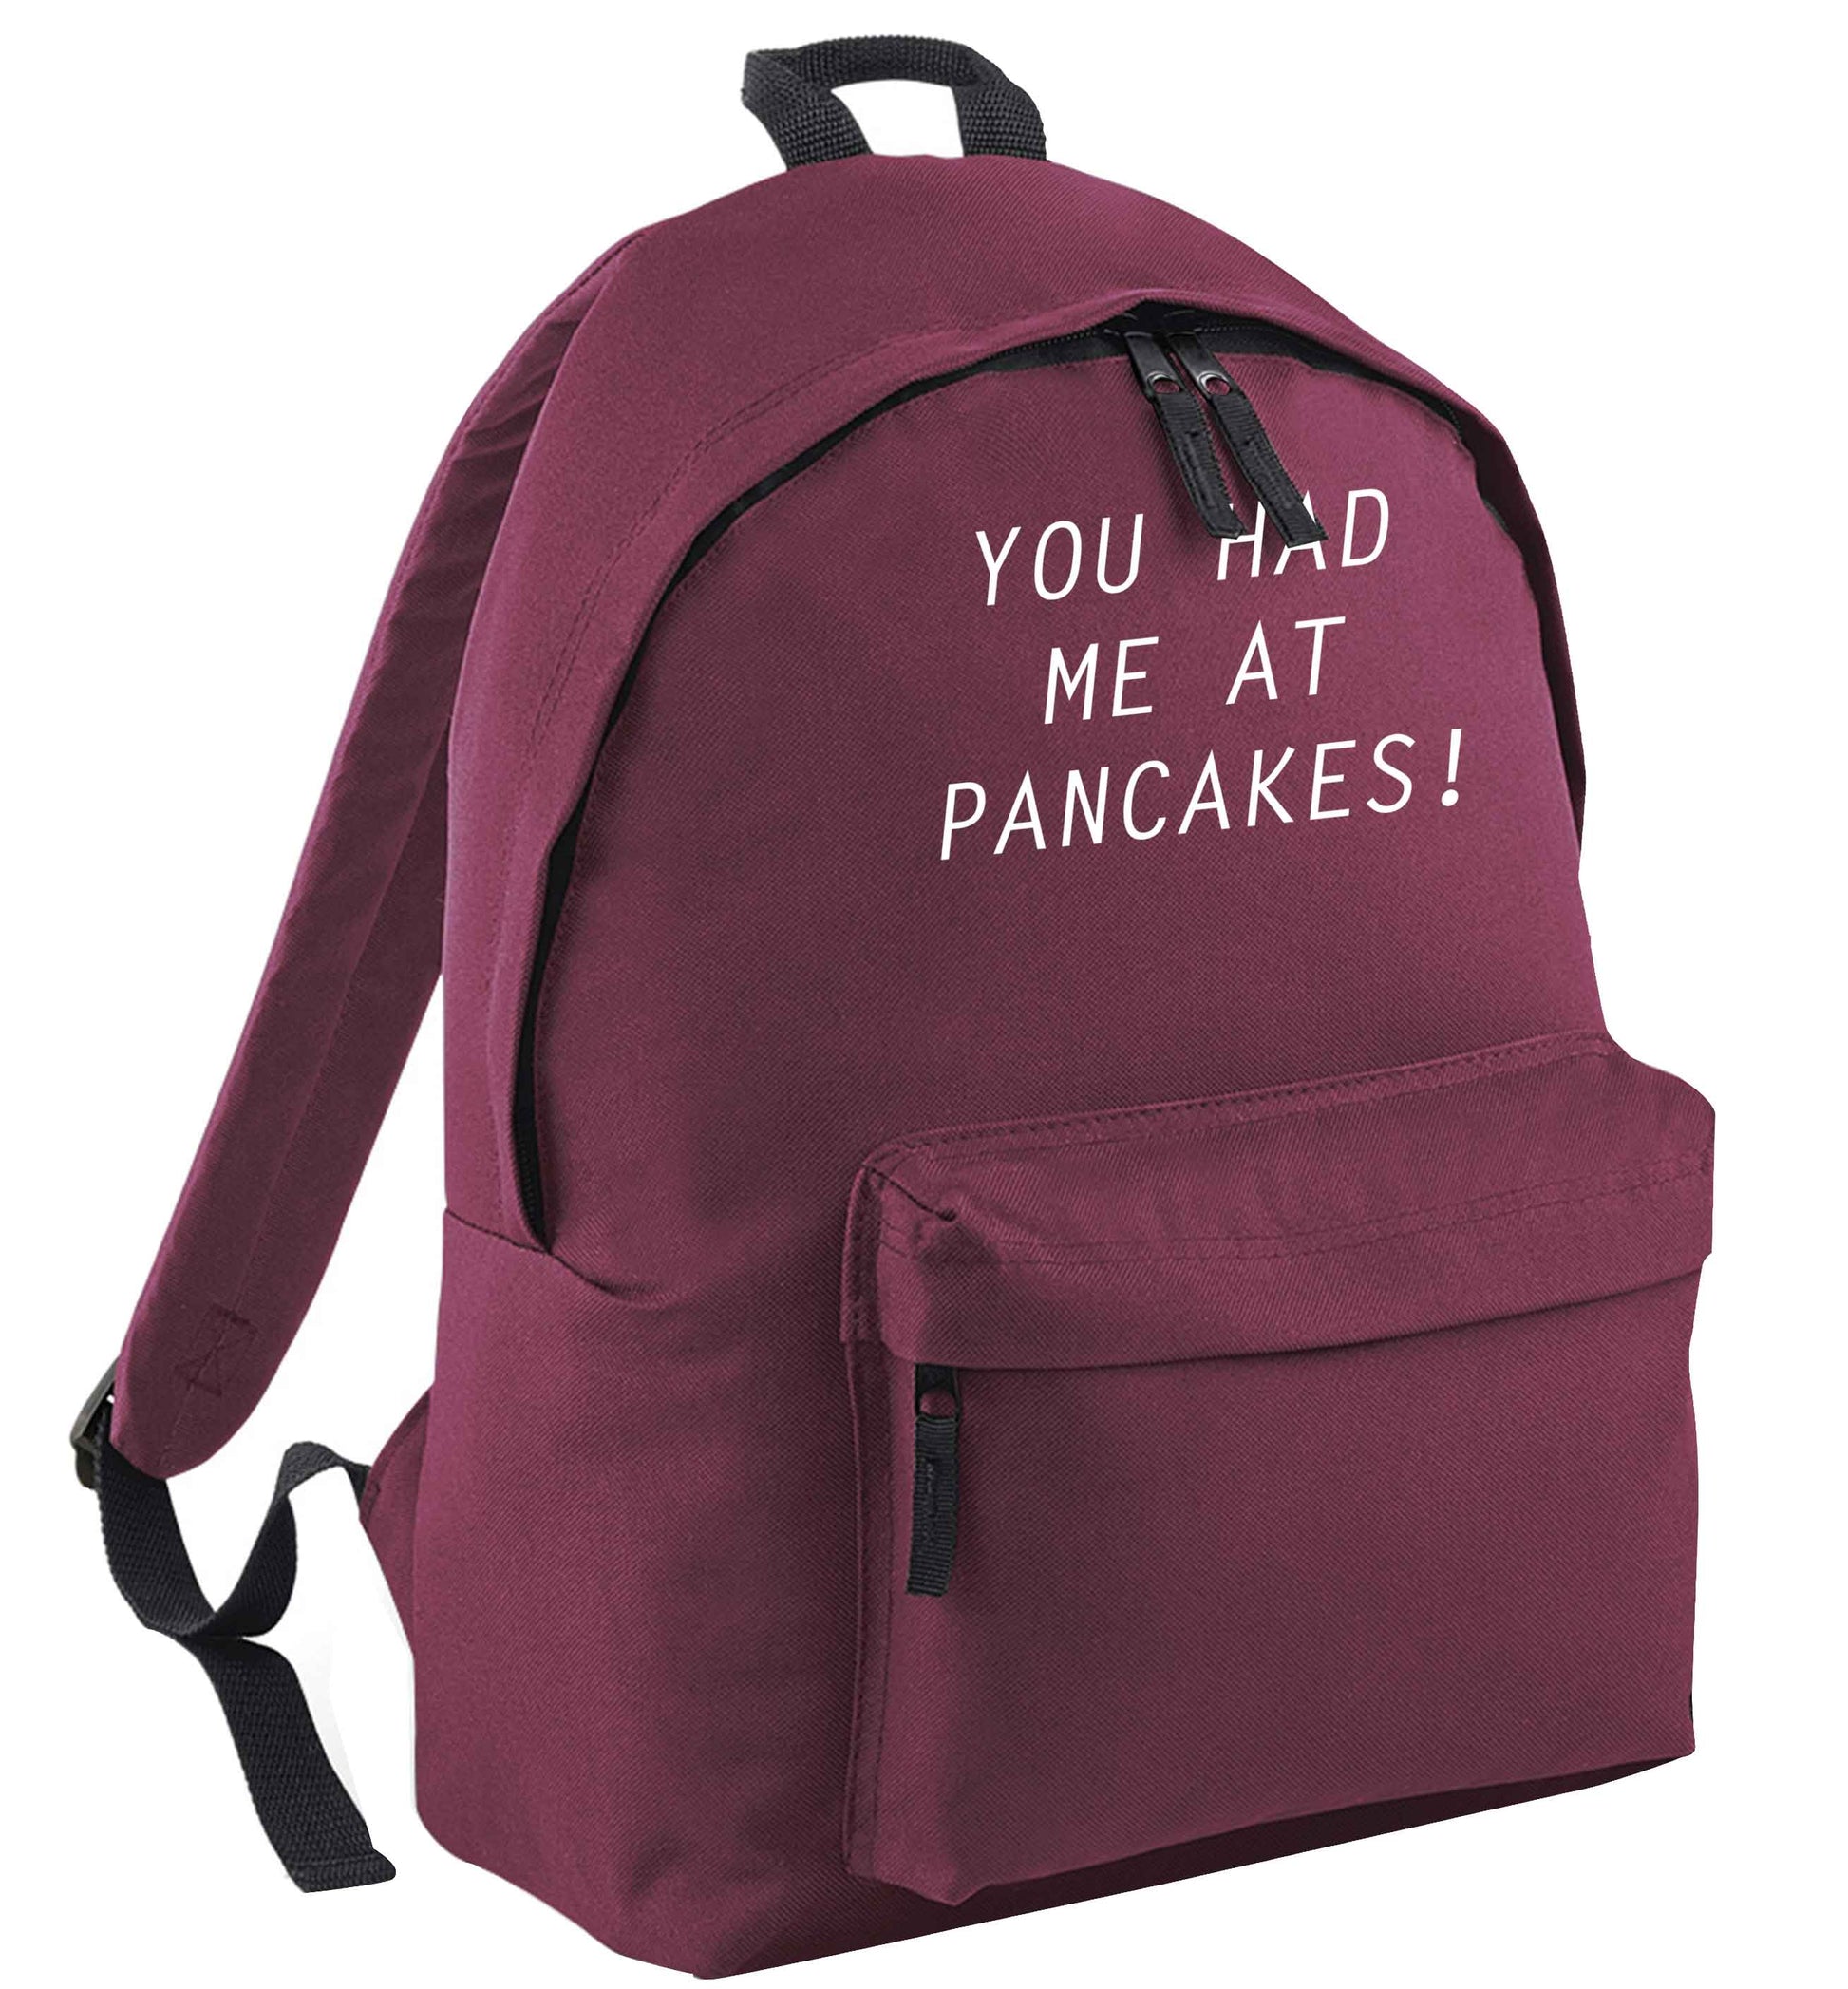 You had me at pancakes black childrens backpack